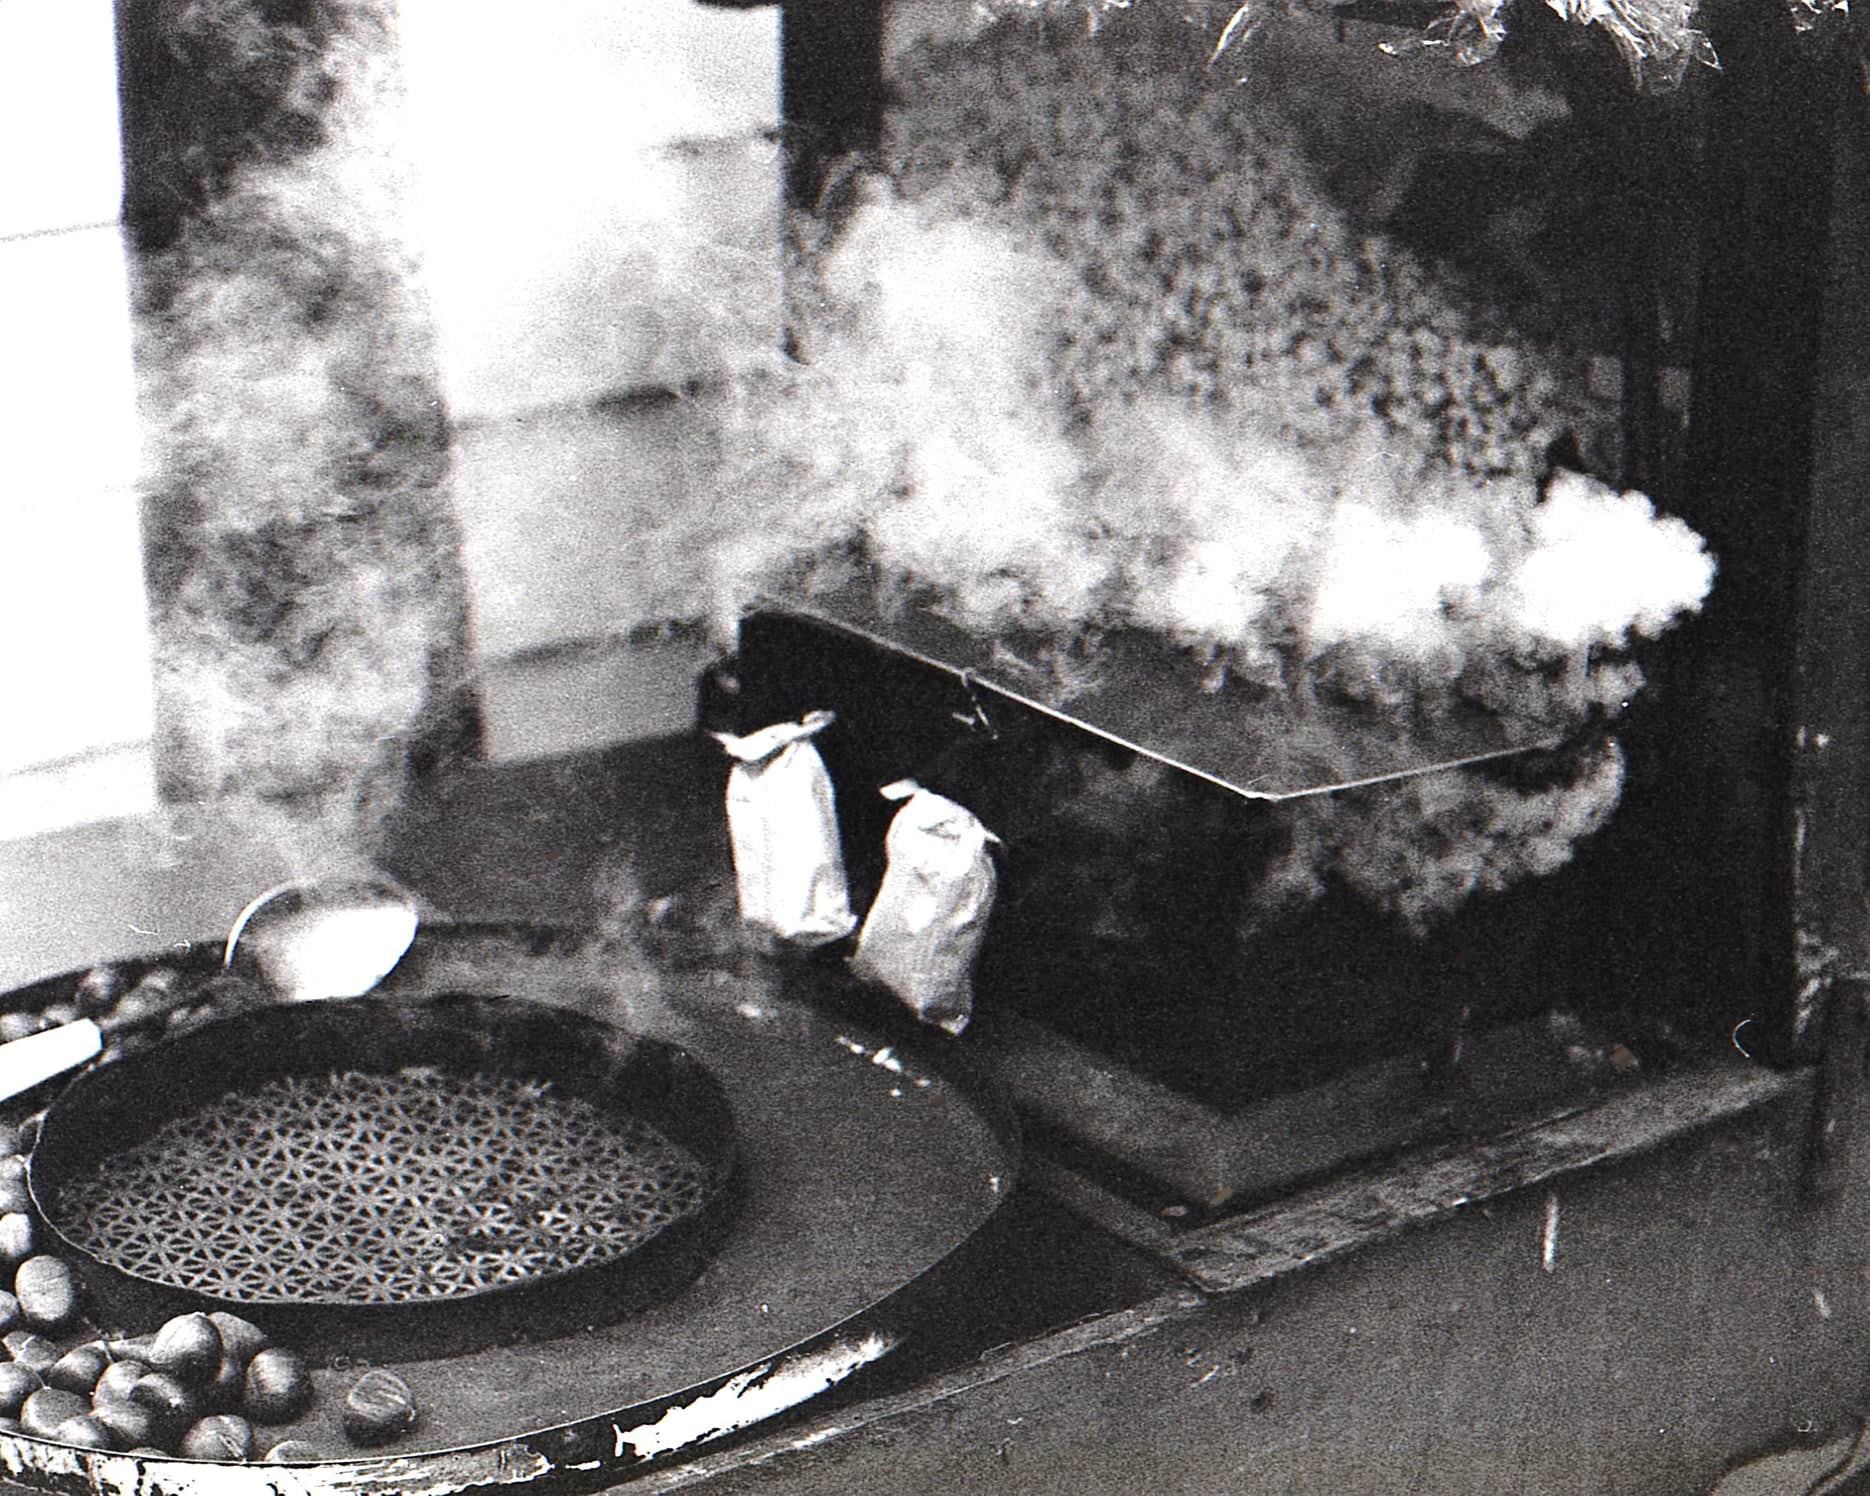 Chestnuts roasting on an open fire... Yonge St. Vendor, mid-1970s.